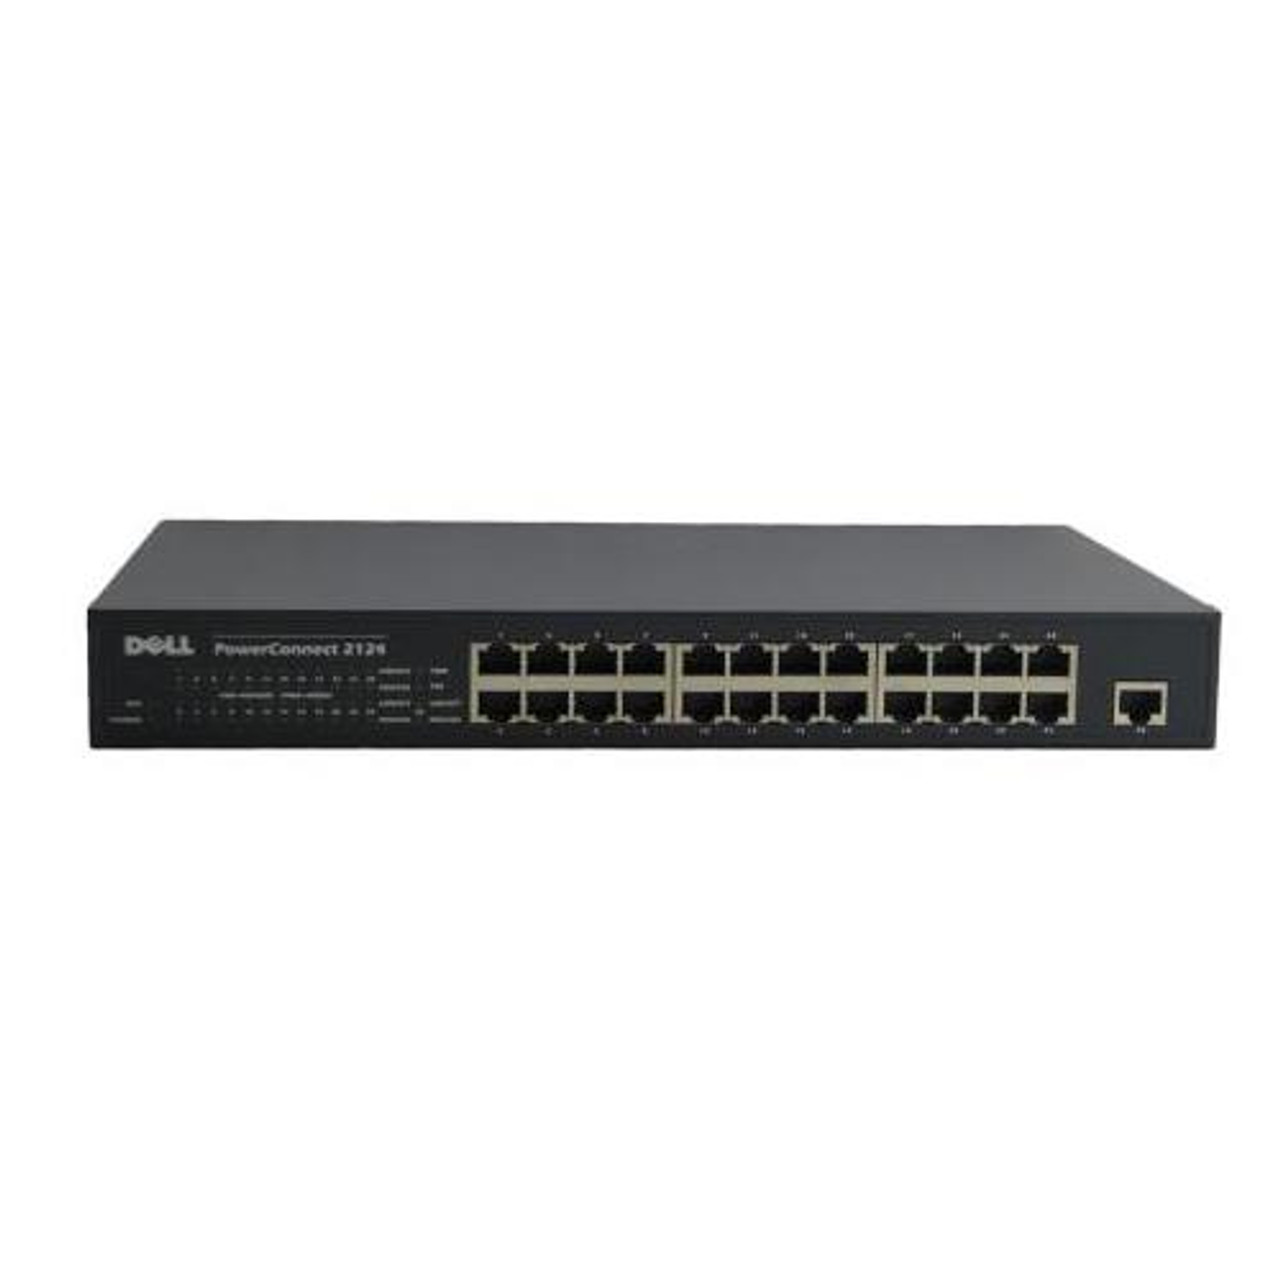 3N347 Dell PowerConnect 2124 24-Ports Fast 10/100BaseT + 1-Port 10/100/1000BaseT Ethernet Network Switch